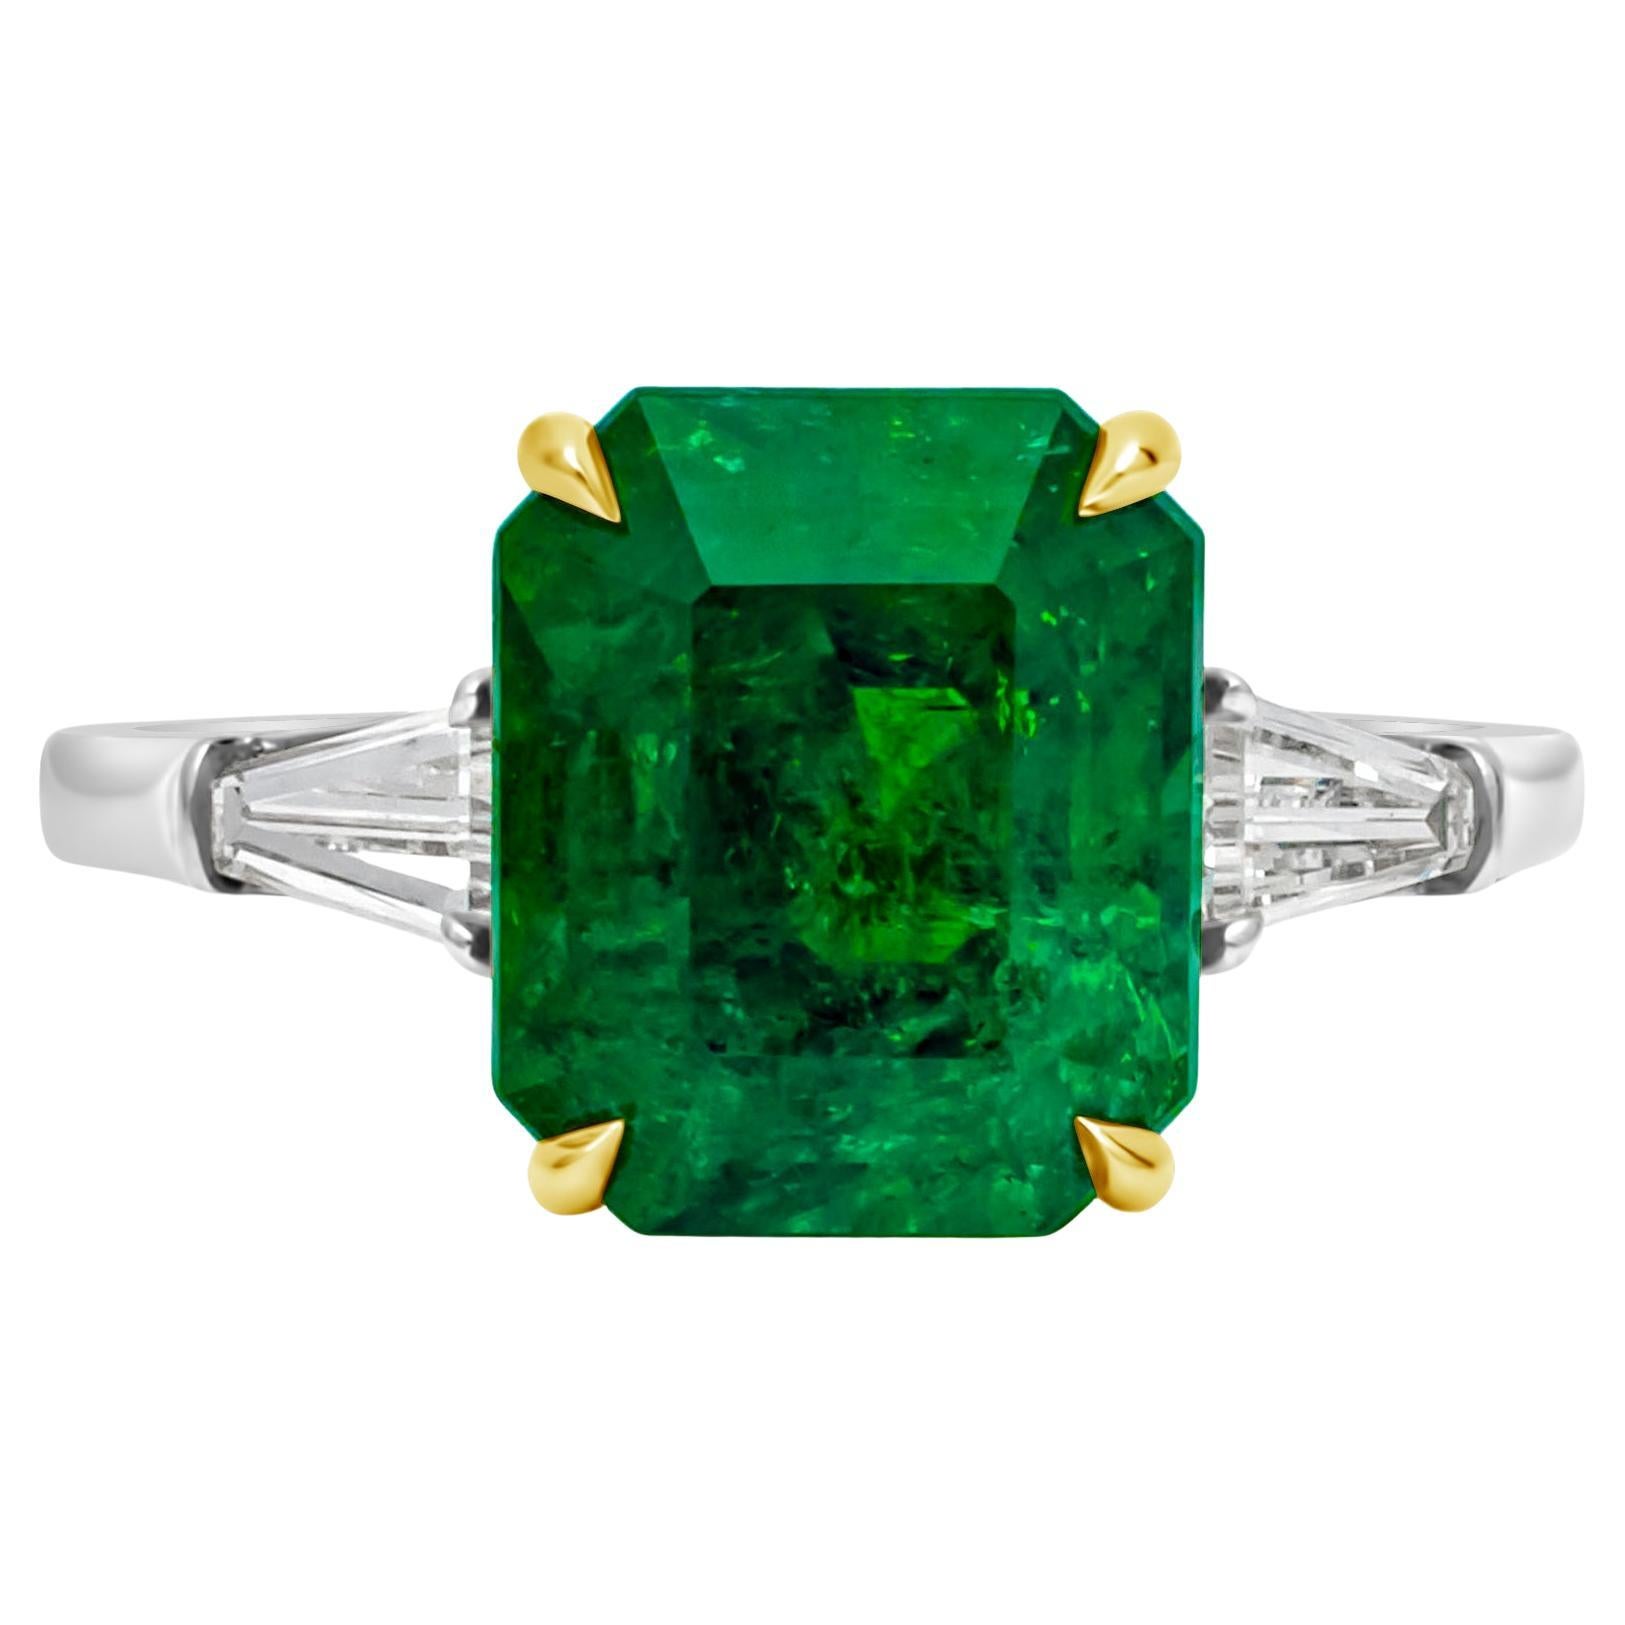 3.84 Carats Emerald Cut Colombian Emerald Three-Stone Engagement Ring